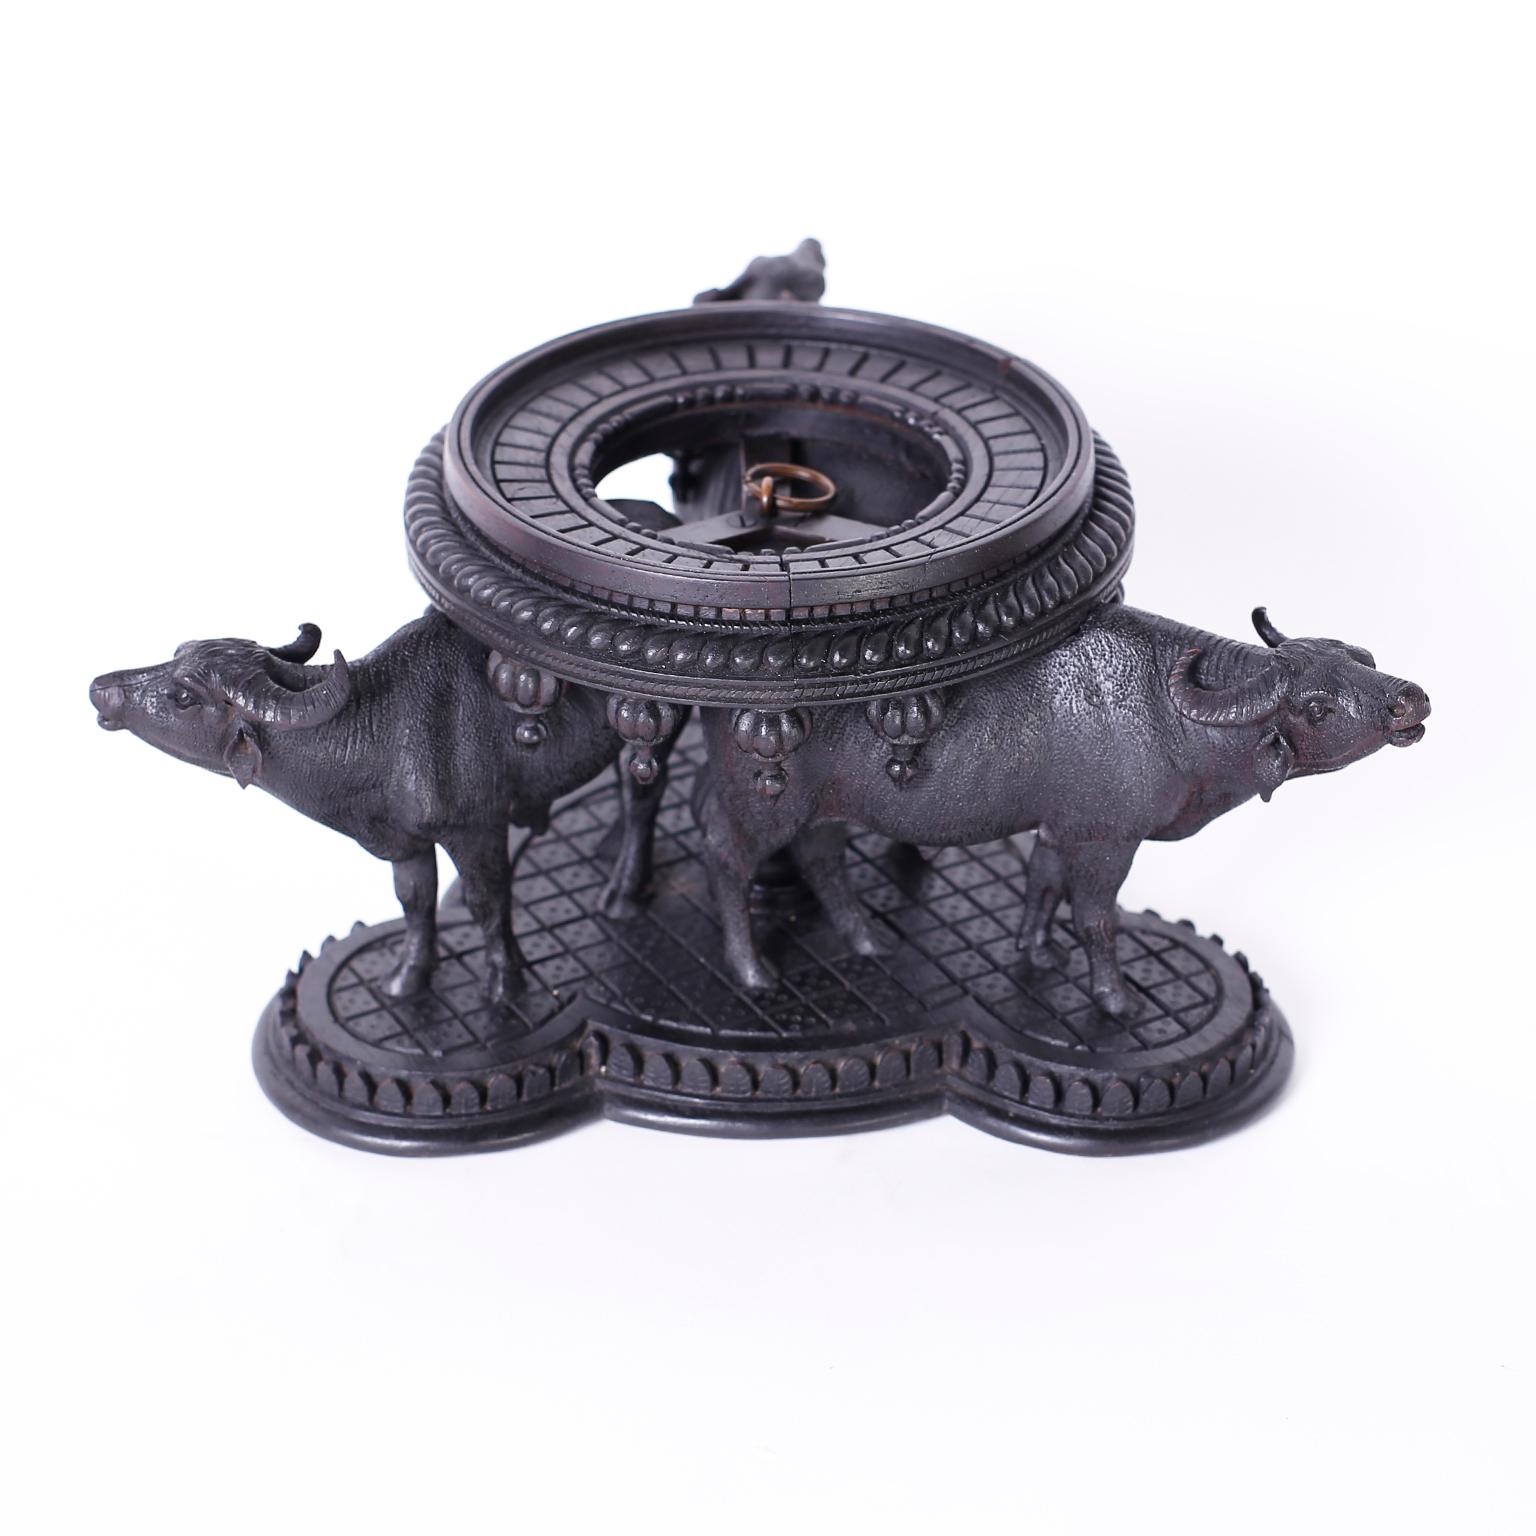 Intriguing antique Anglo-Indian stand masterfully carved from indigenous hardwood depicting three water buffaloes supporting a carved round molding.

